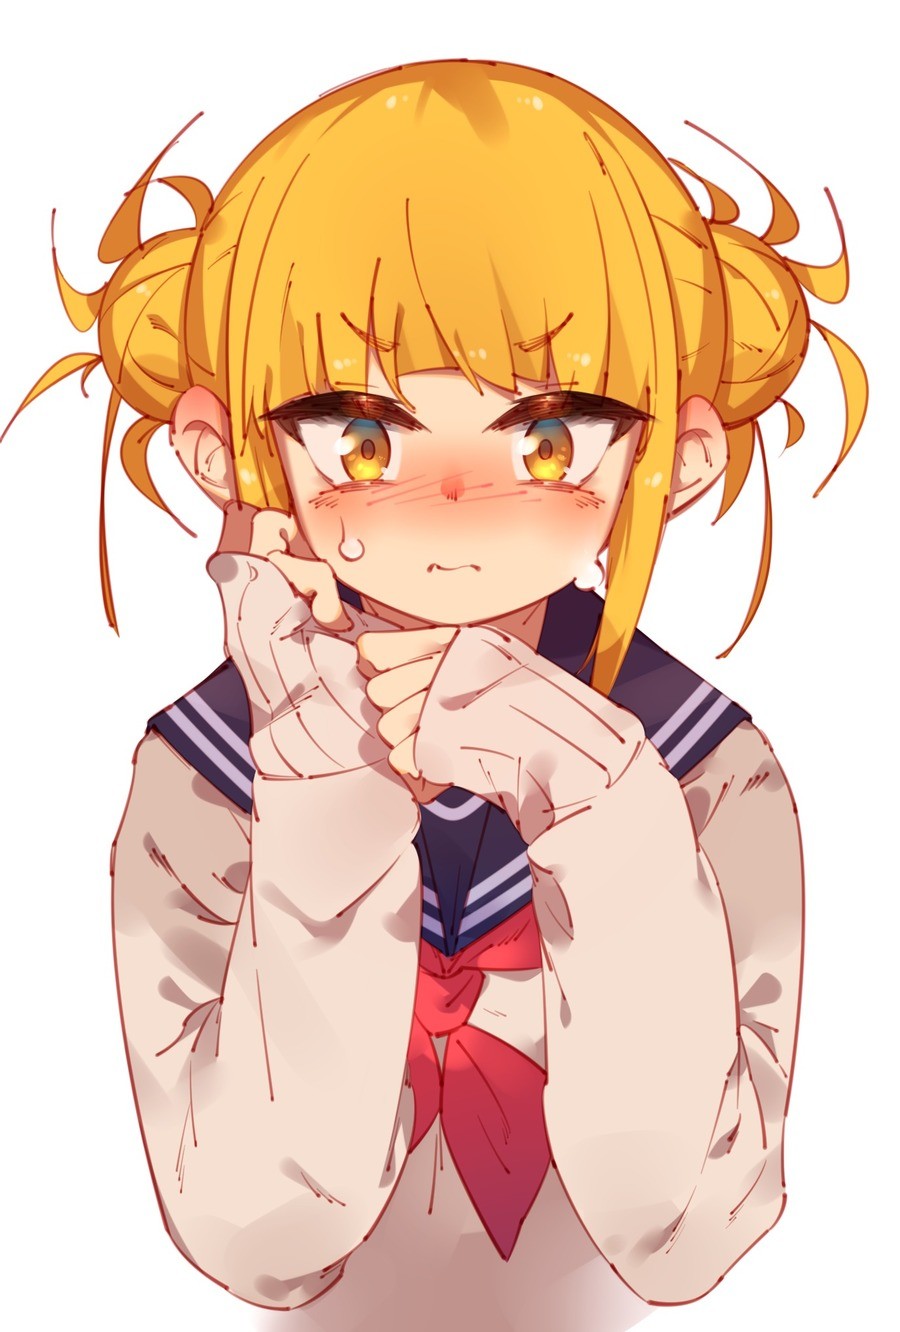 Daily Toga - 798: Shy Toga. join list: DailyToga (477 subs)Mention History Source: .